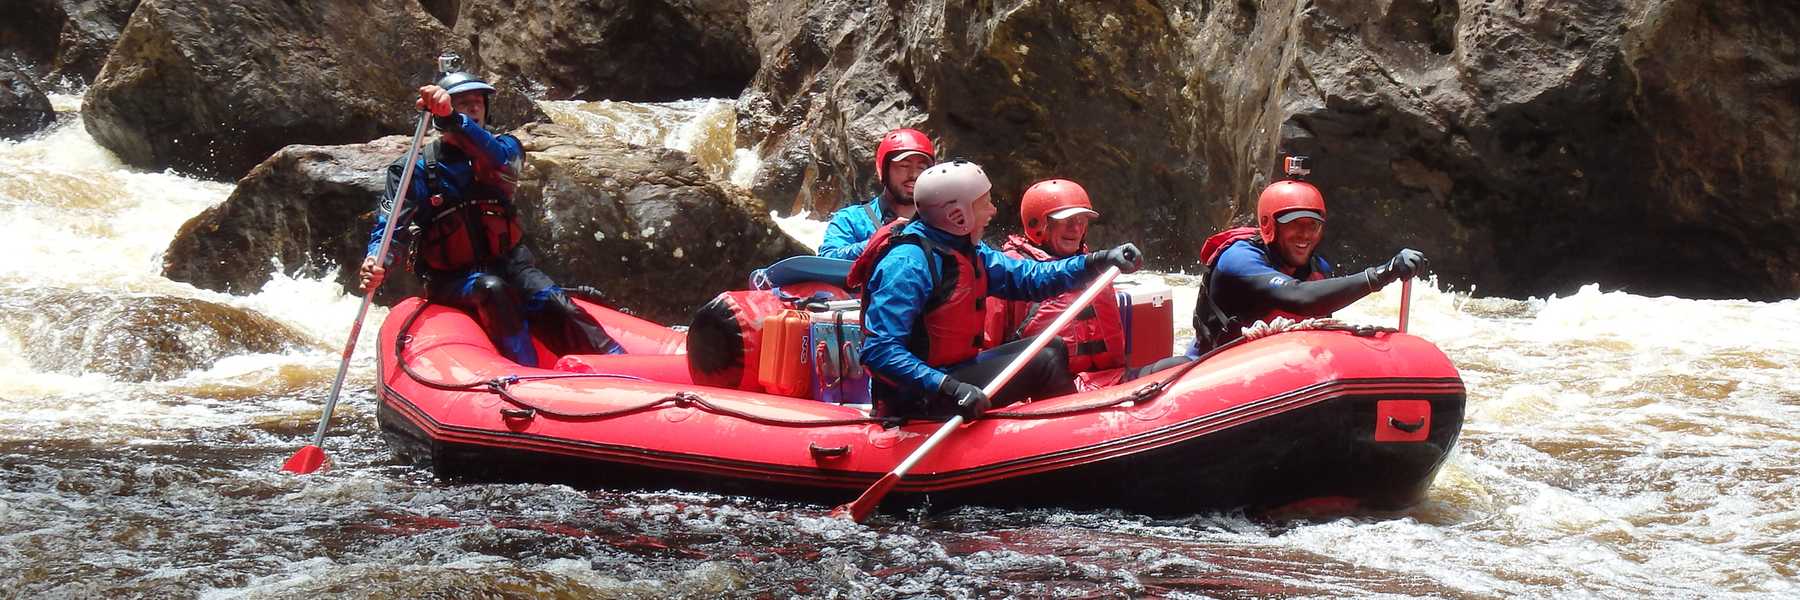 Rafting the Thunderush rapid in the Great Ravine on the Franklin River, Tasmania